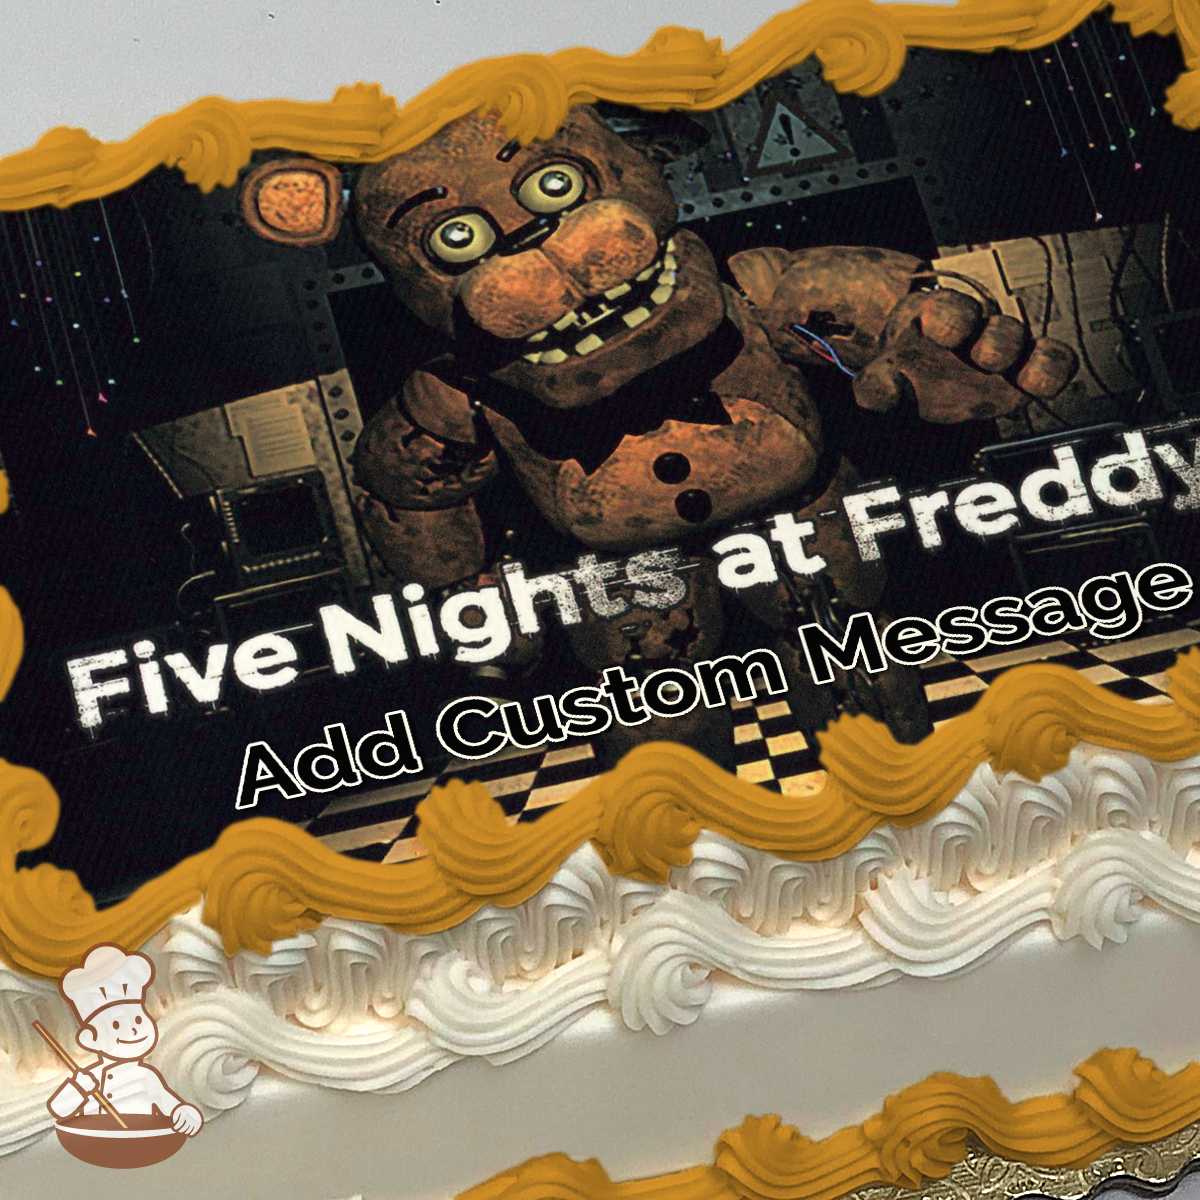 Five Nights At Freddy's Birthday Party Ideas, Photo 4 of 11